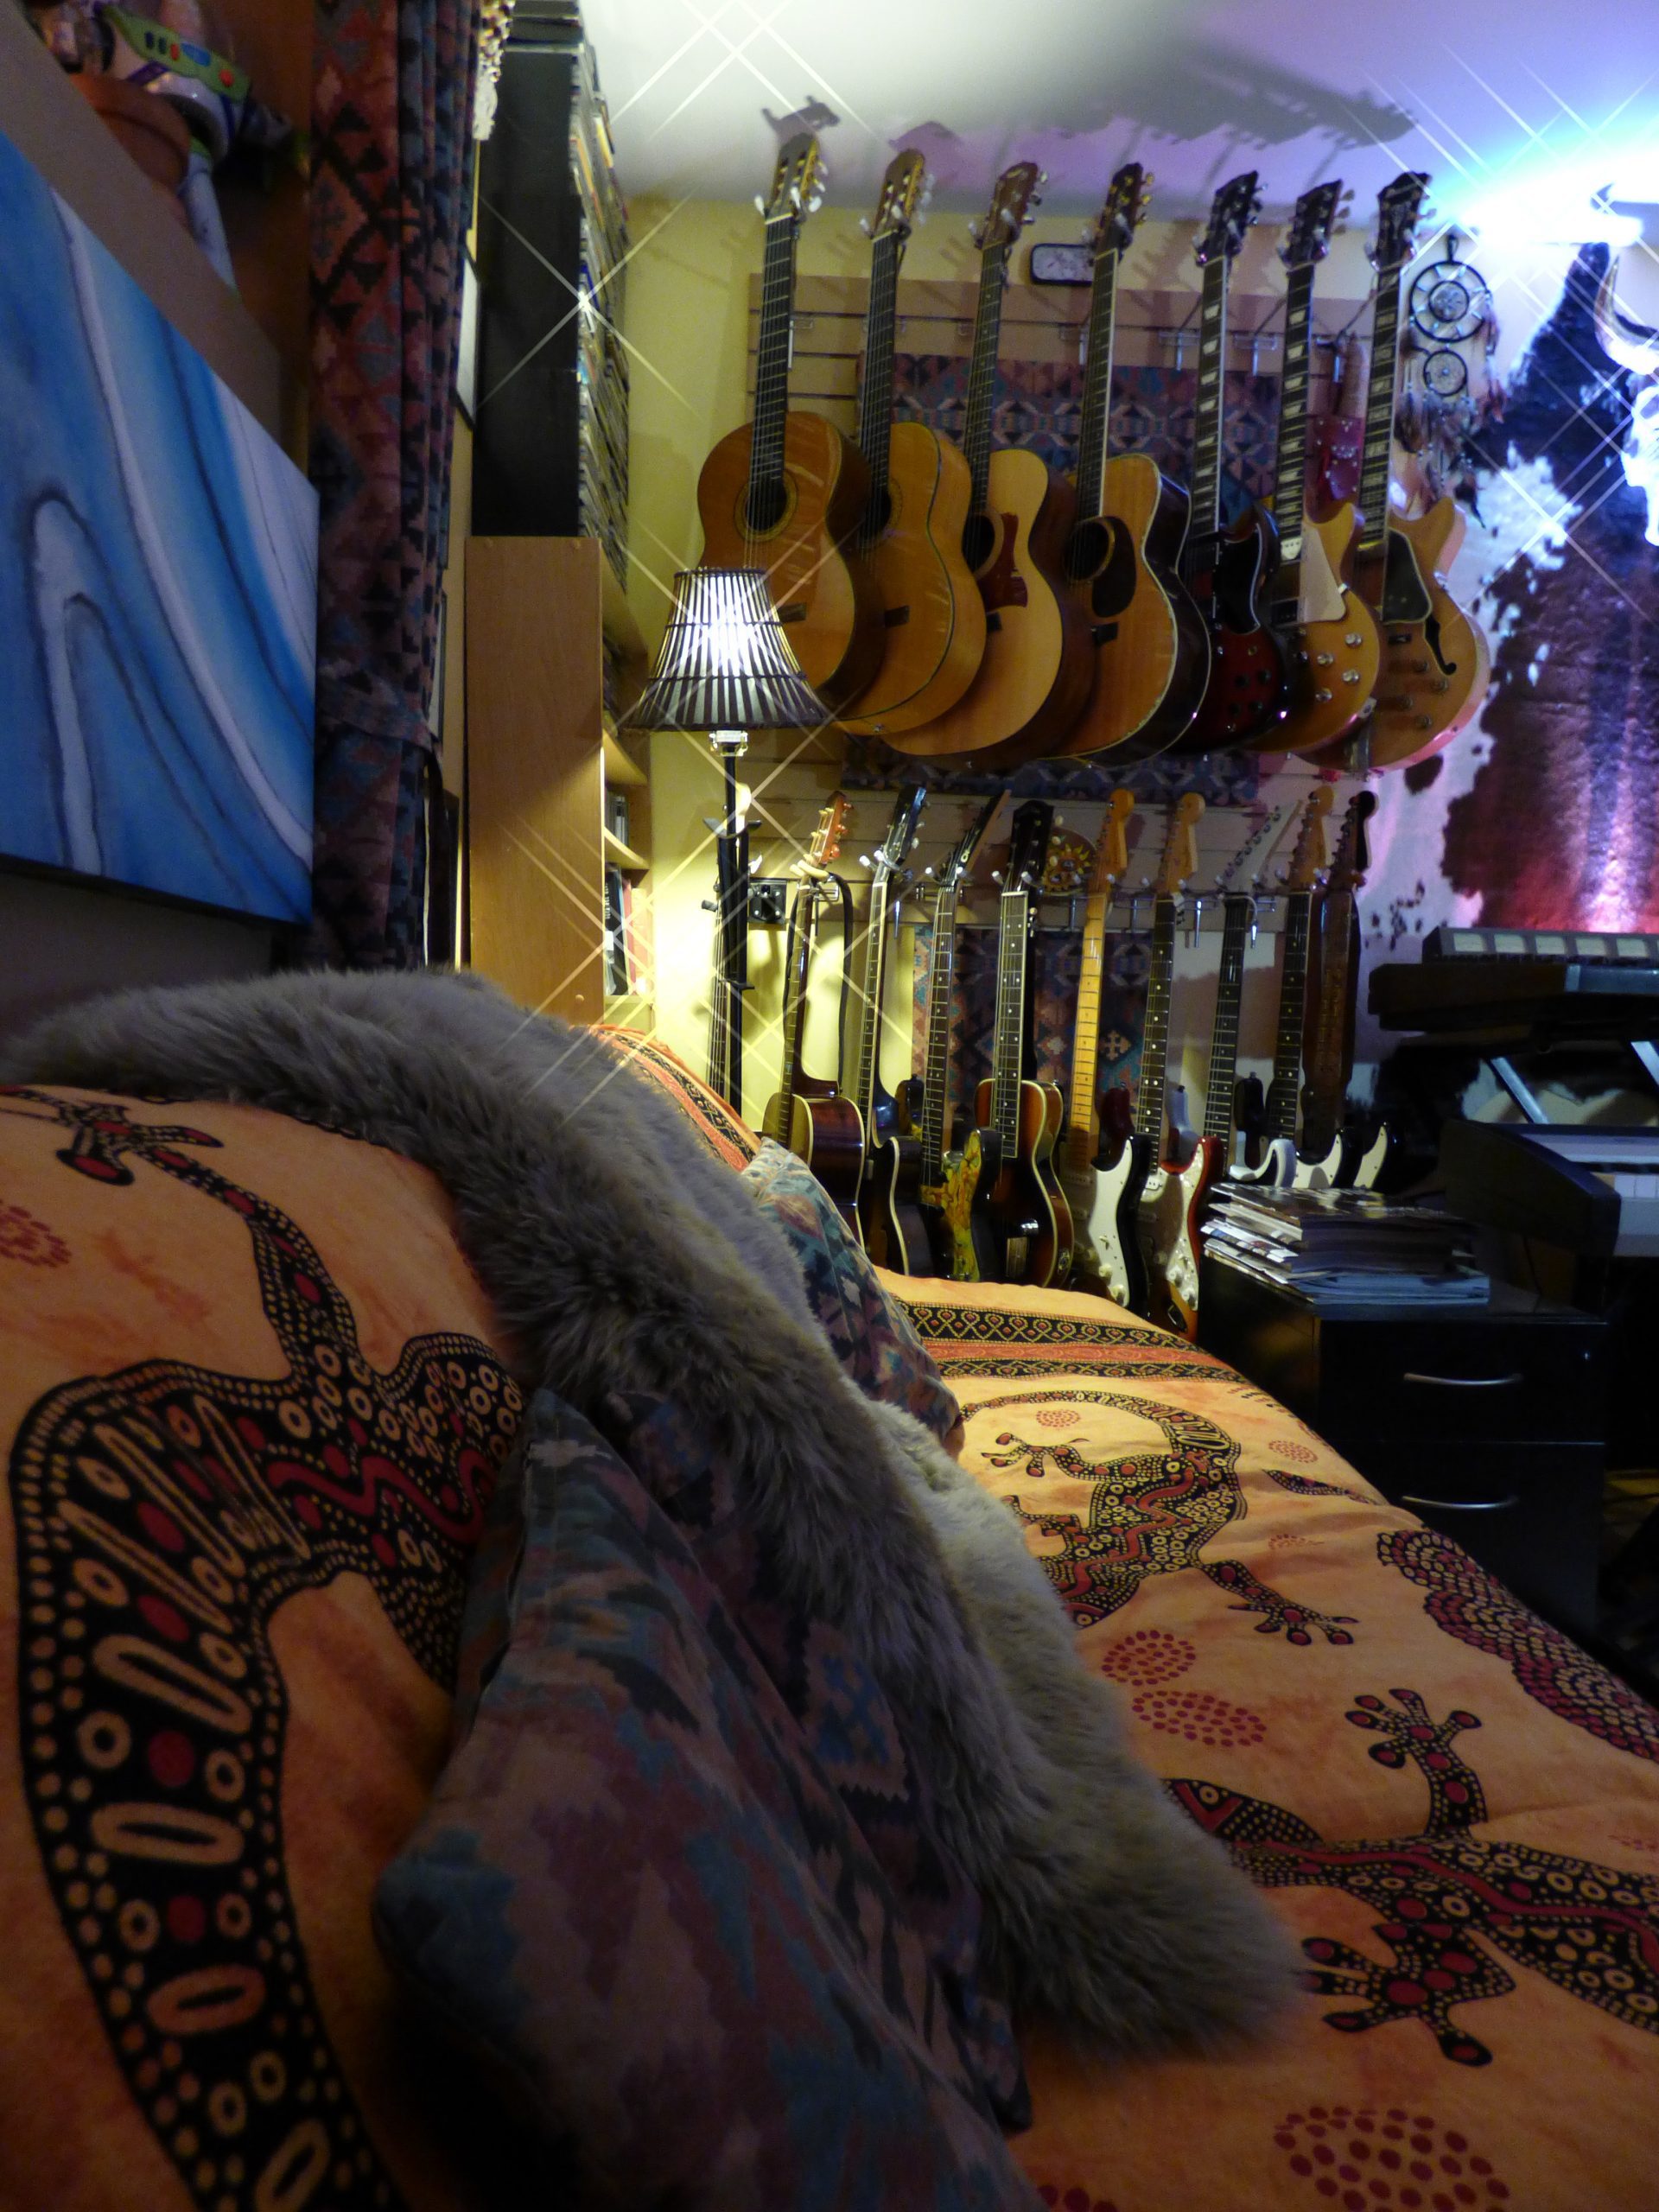 SEGPOP Studios control room with guitars on the wall flanked by a comfy couch.